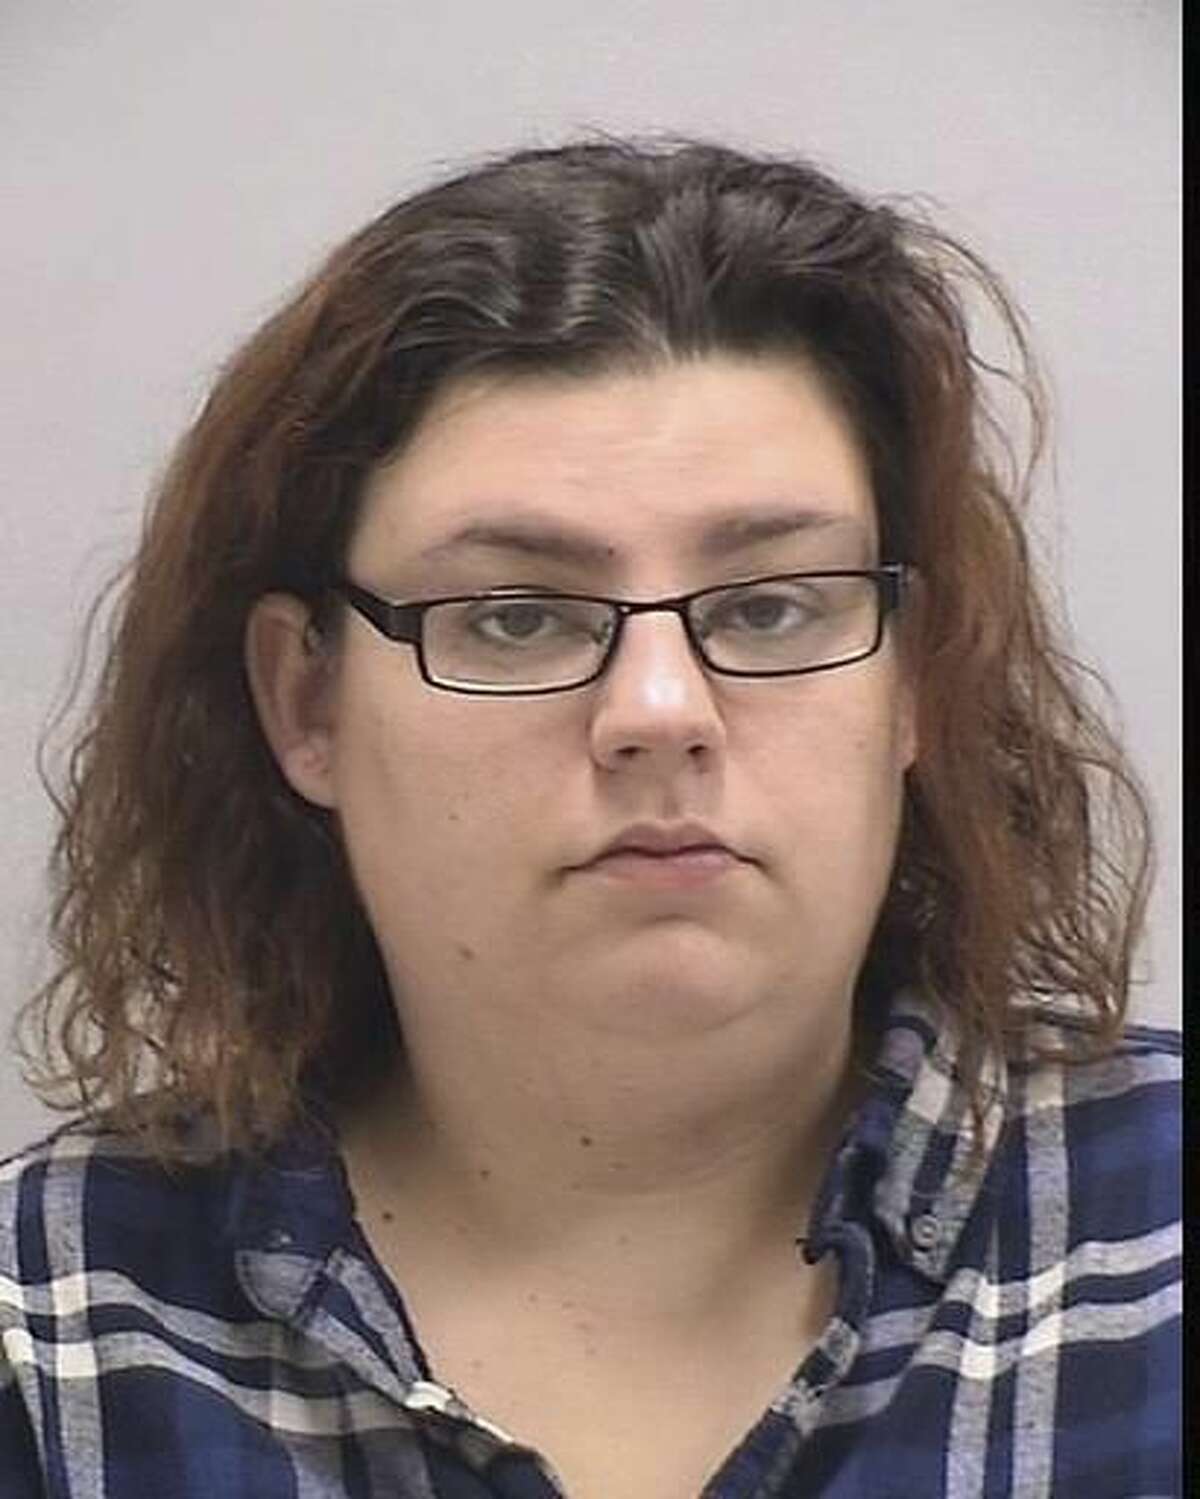 This undated handout photo provided by the Town of Orange Police Department in Connecticut shows Kimberly Onorato. Onorato was charged with a felony count of impairing morals of a minor and misdemeanor breach of peace after police say she engaged in sexual activity in a parked car in on Nov. 15, 2016, while a 6-year-old boy watched in the back seat. (Town of Orange Police Department via AP)